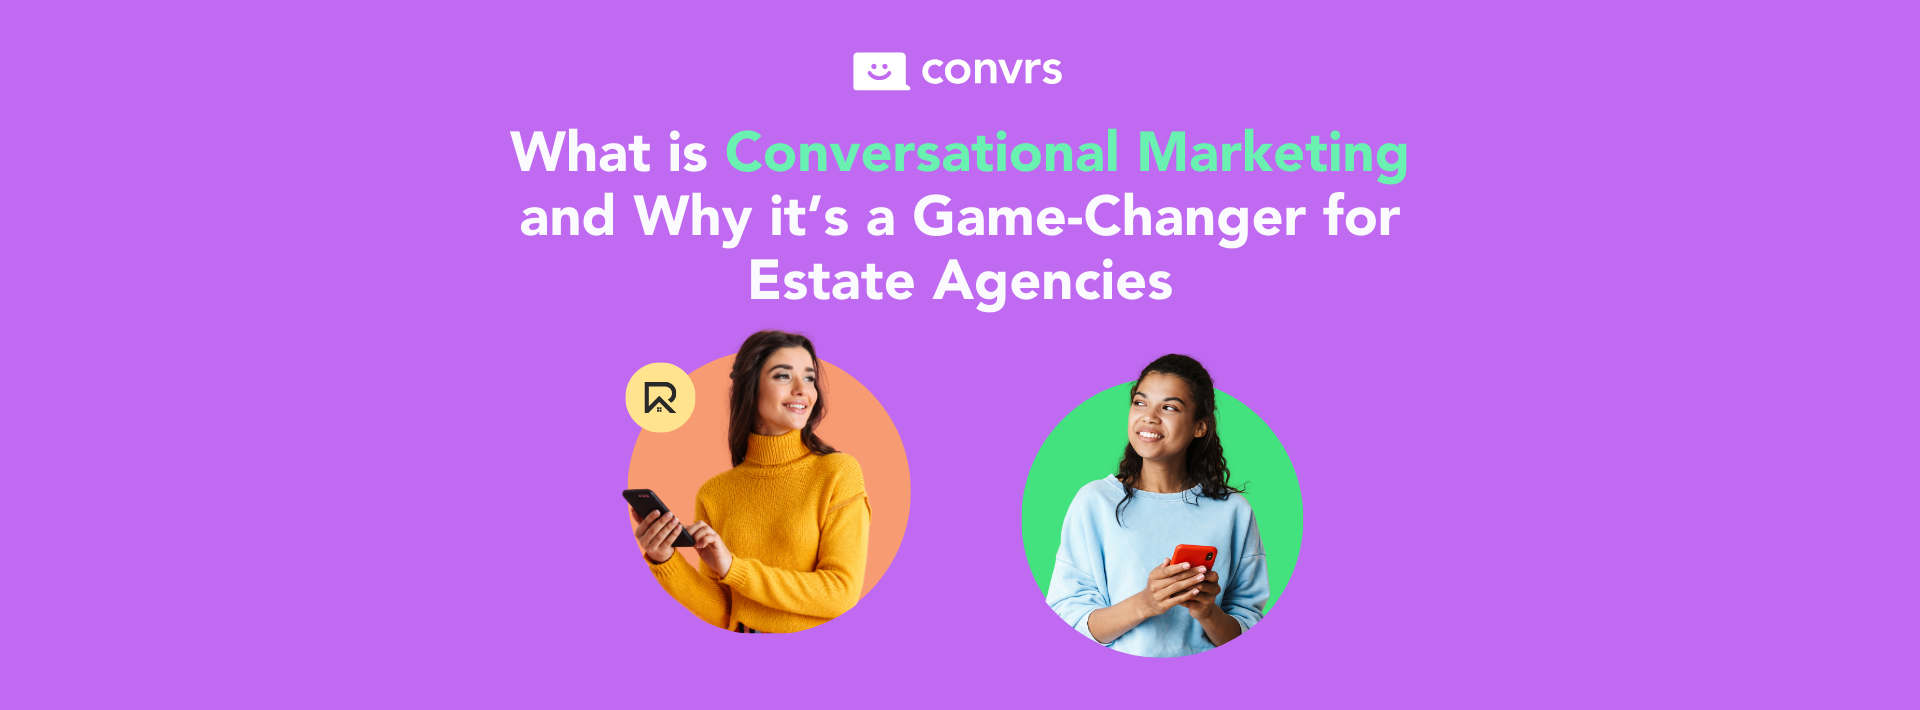 Estate Agent communicating with customer through messaging using Conversational Marketing